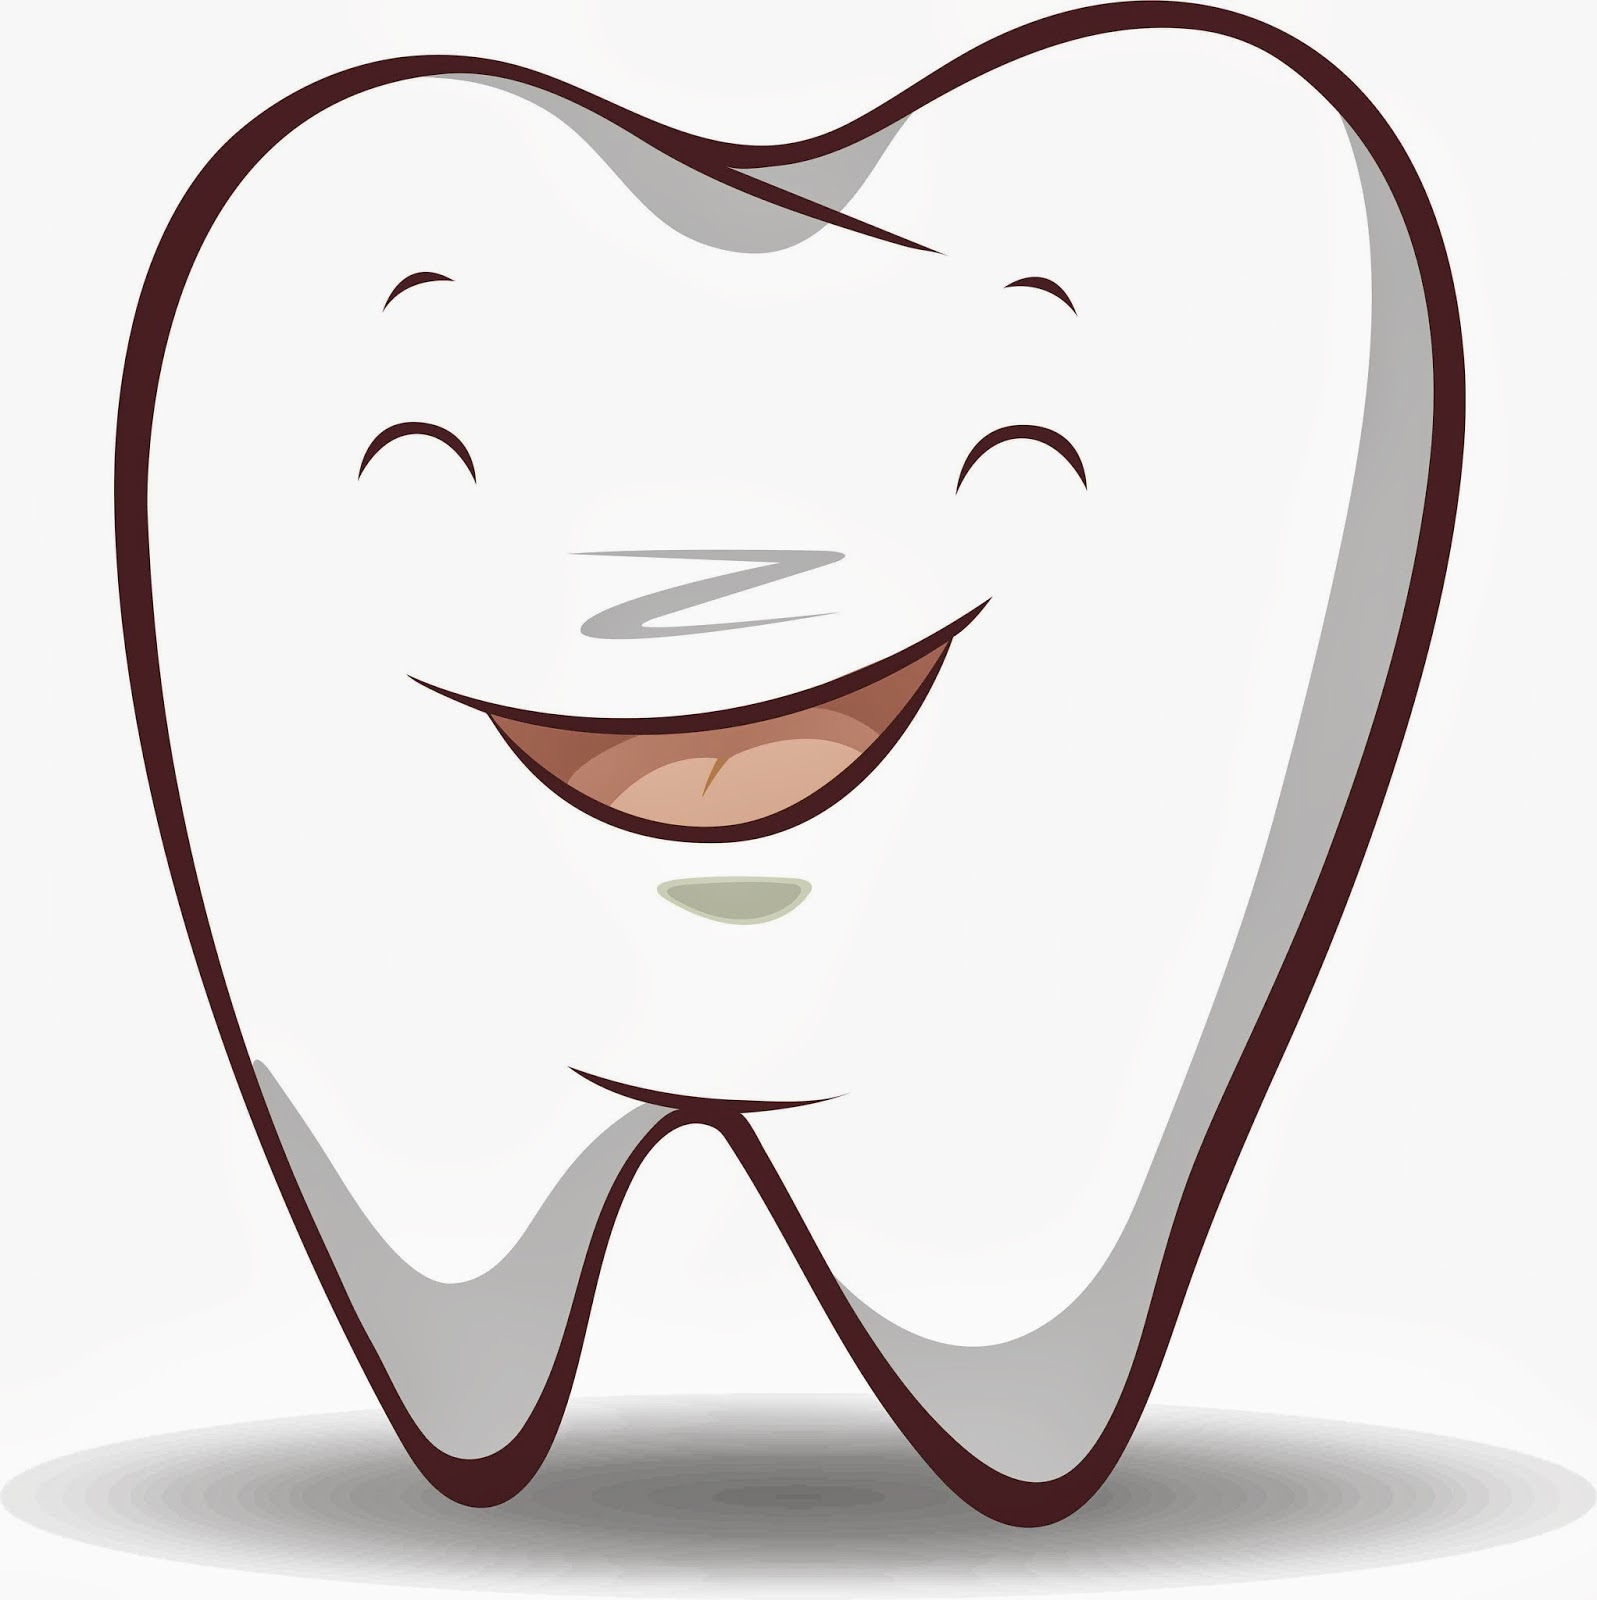 sore tooth clipart - photo #50